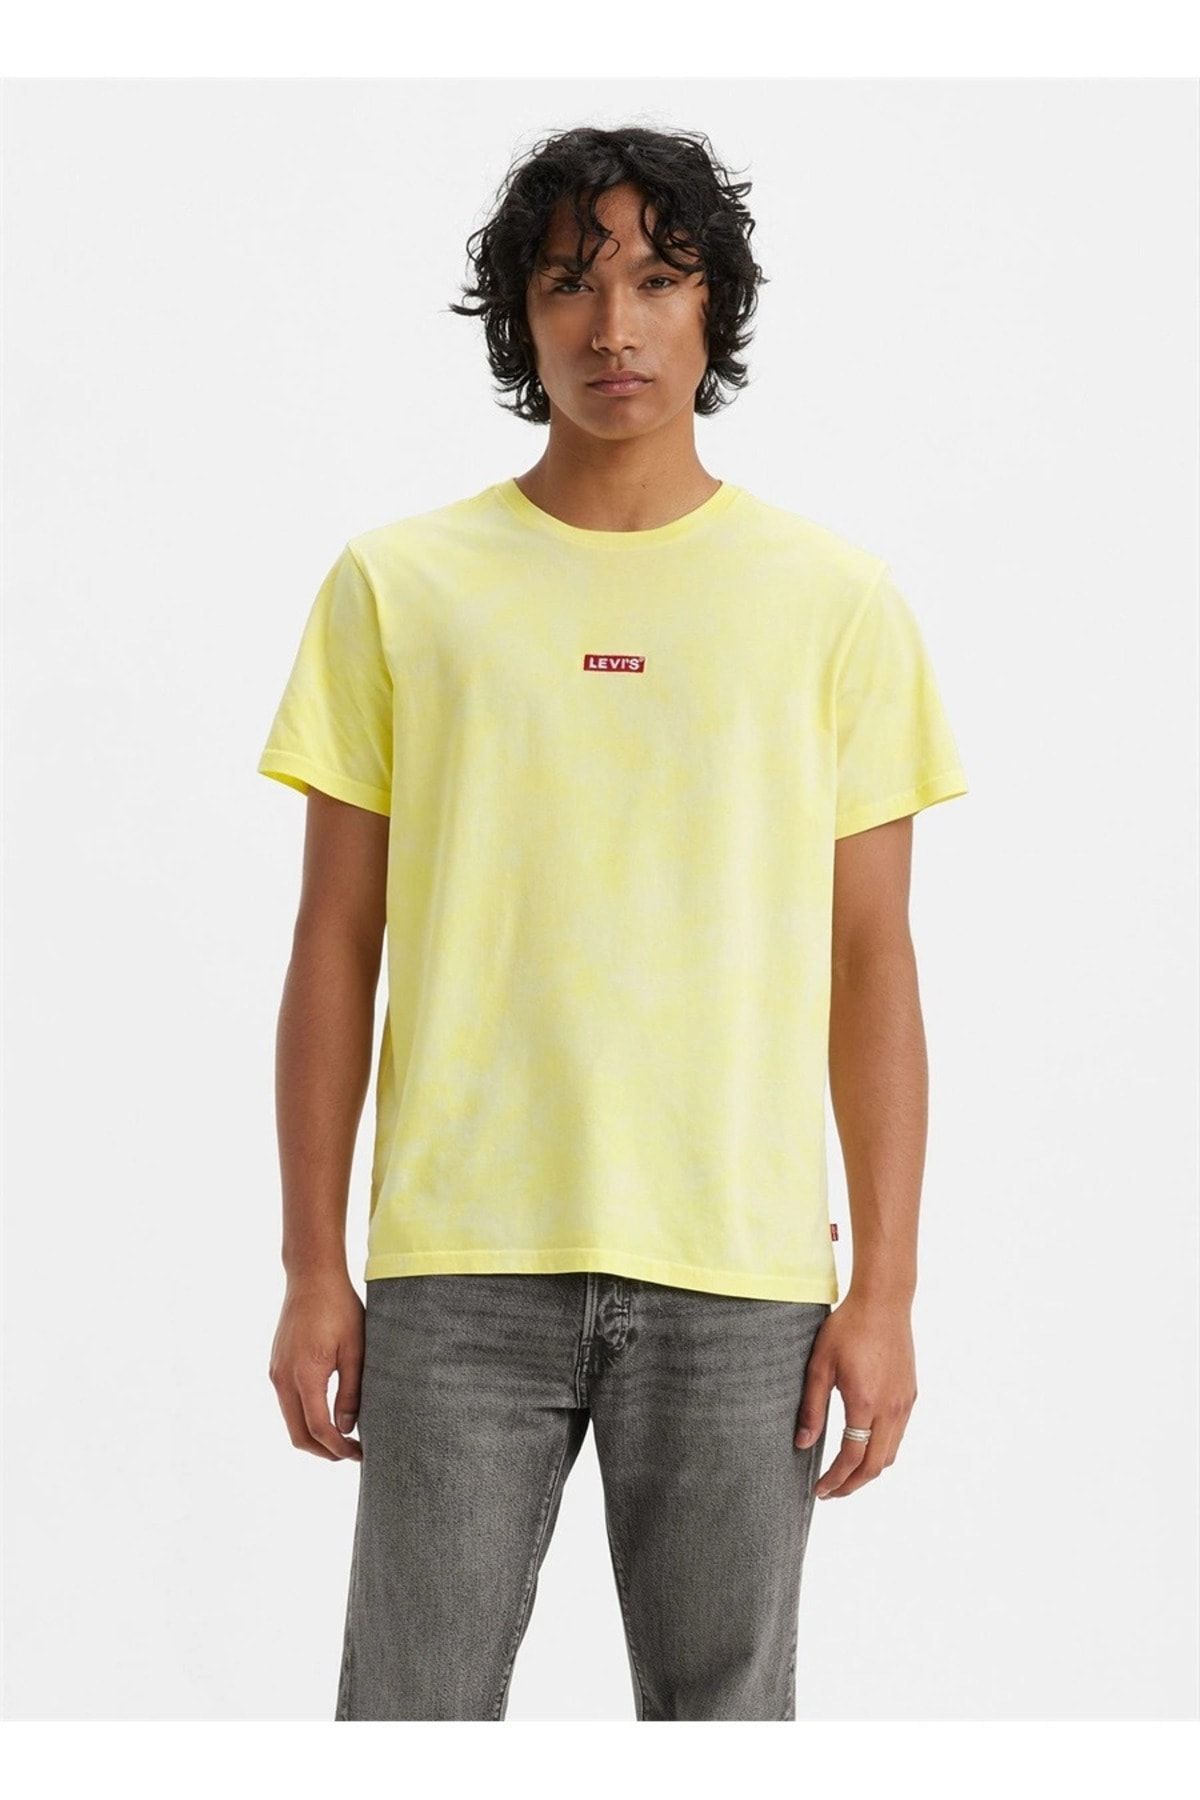 Levi's Levis T-Shirt RELAXED 79554-0028